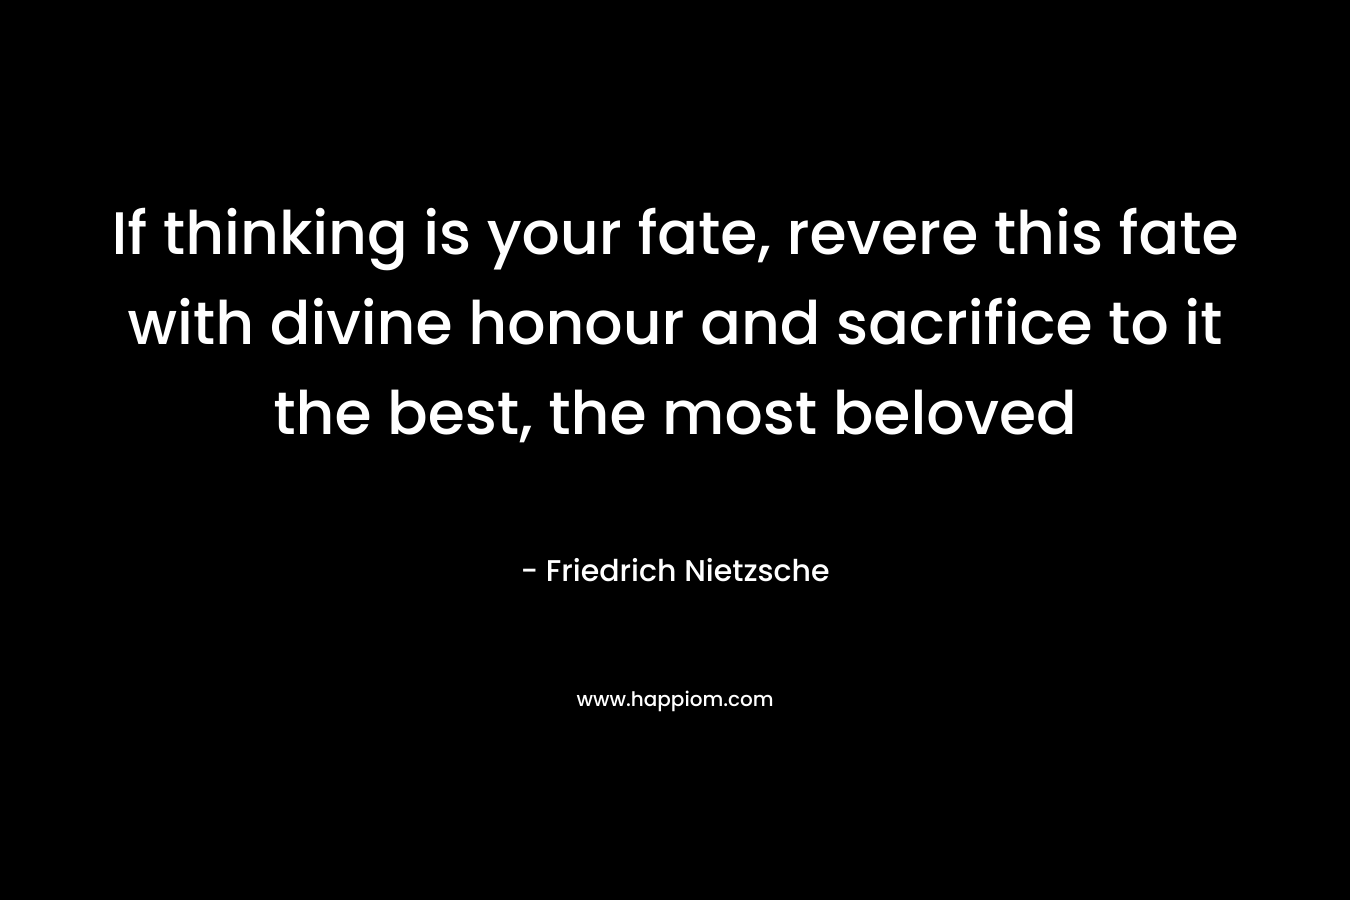 If thinking is your fate, revere this fate with divine honour and sacrifice to it the best, the most beloved